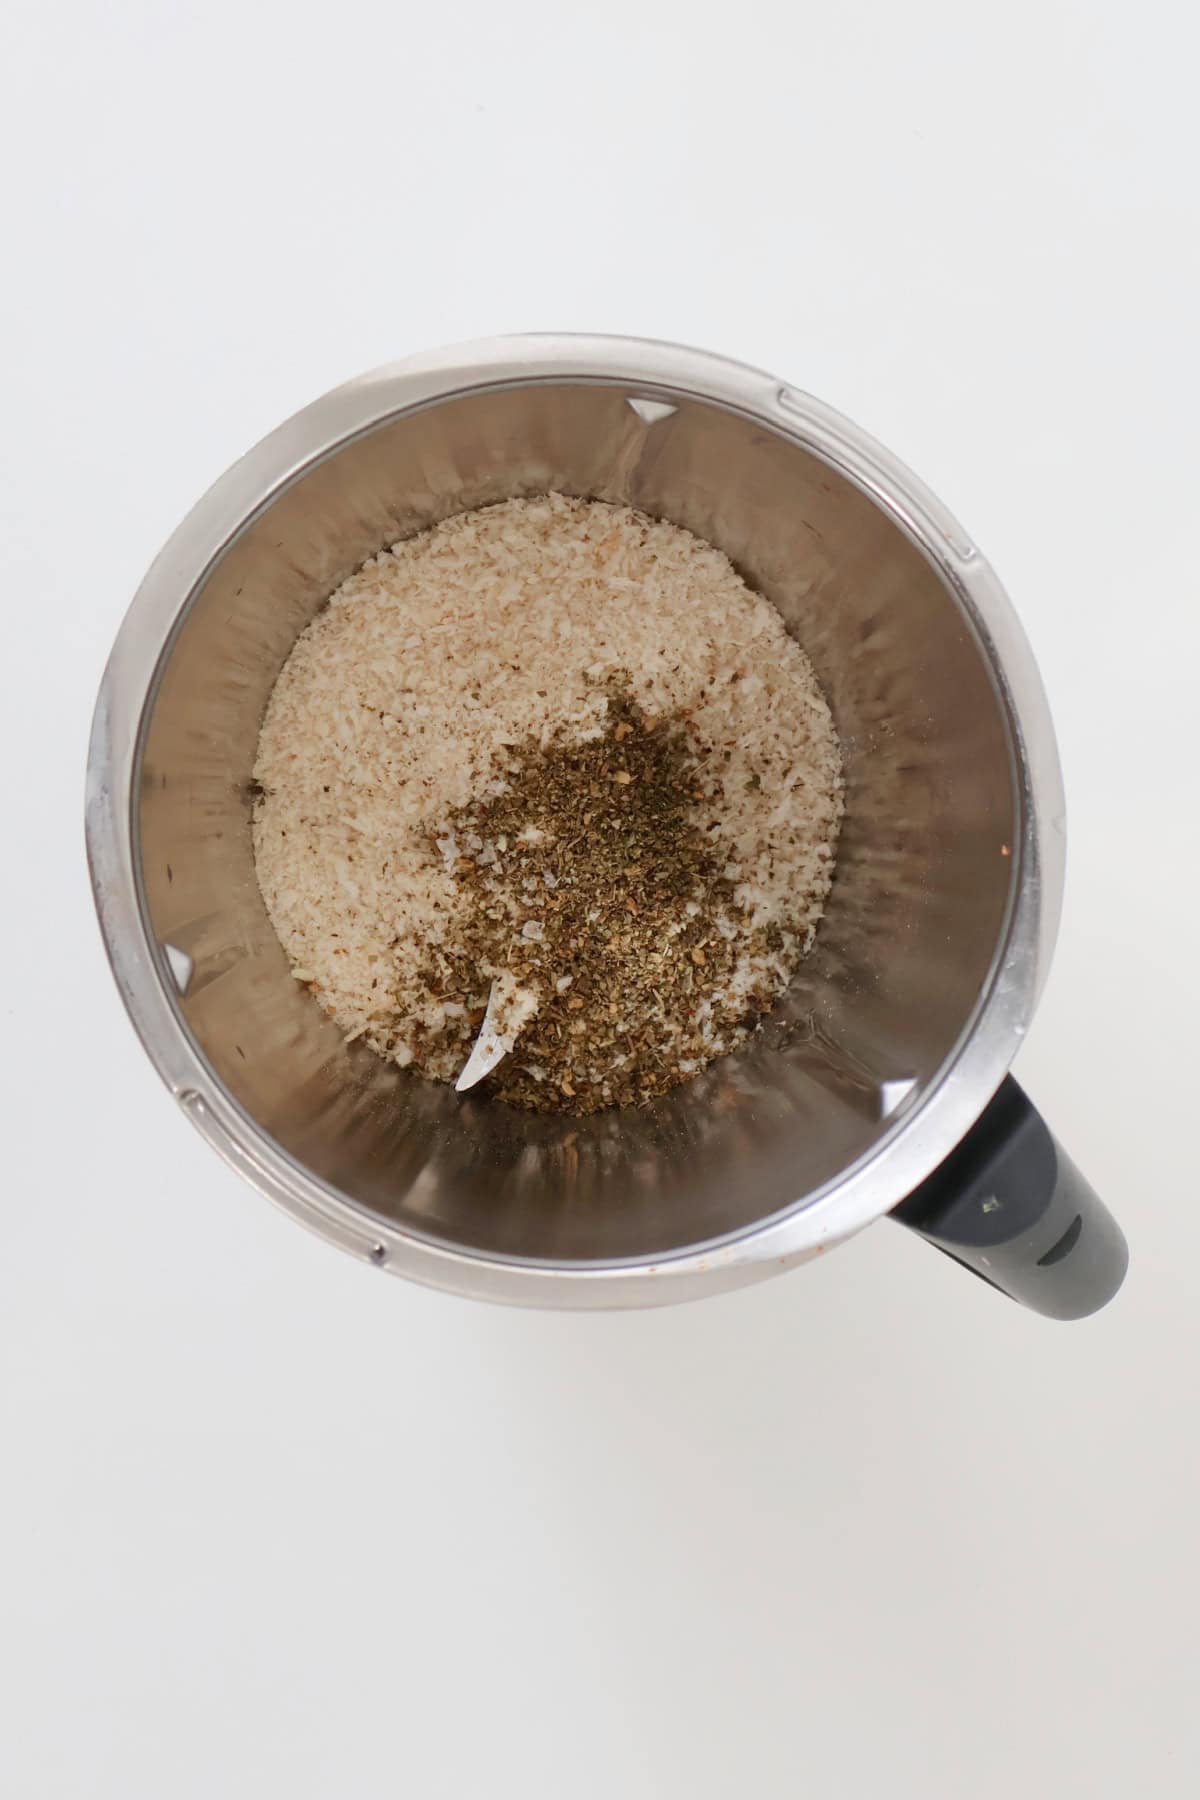 Chicken tenders coating in a thermomix bowl.